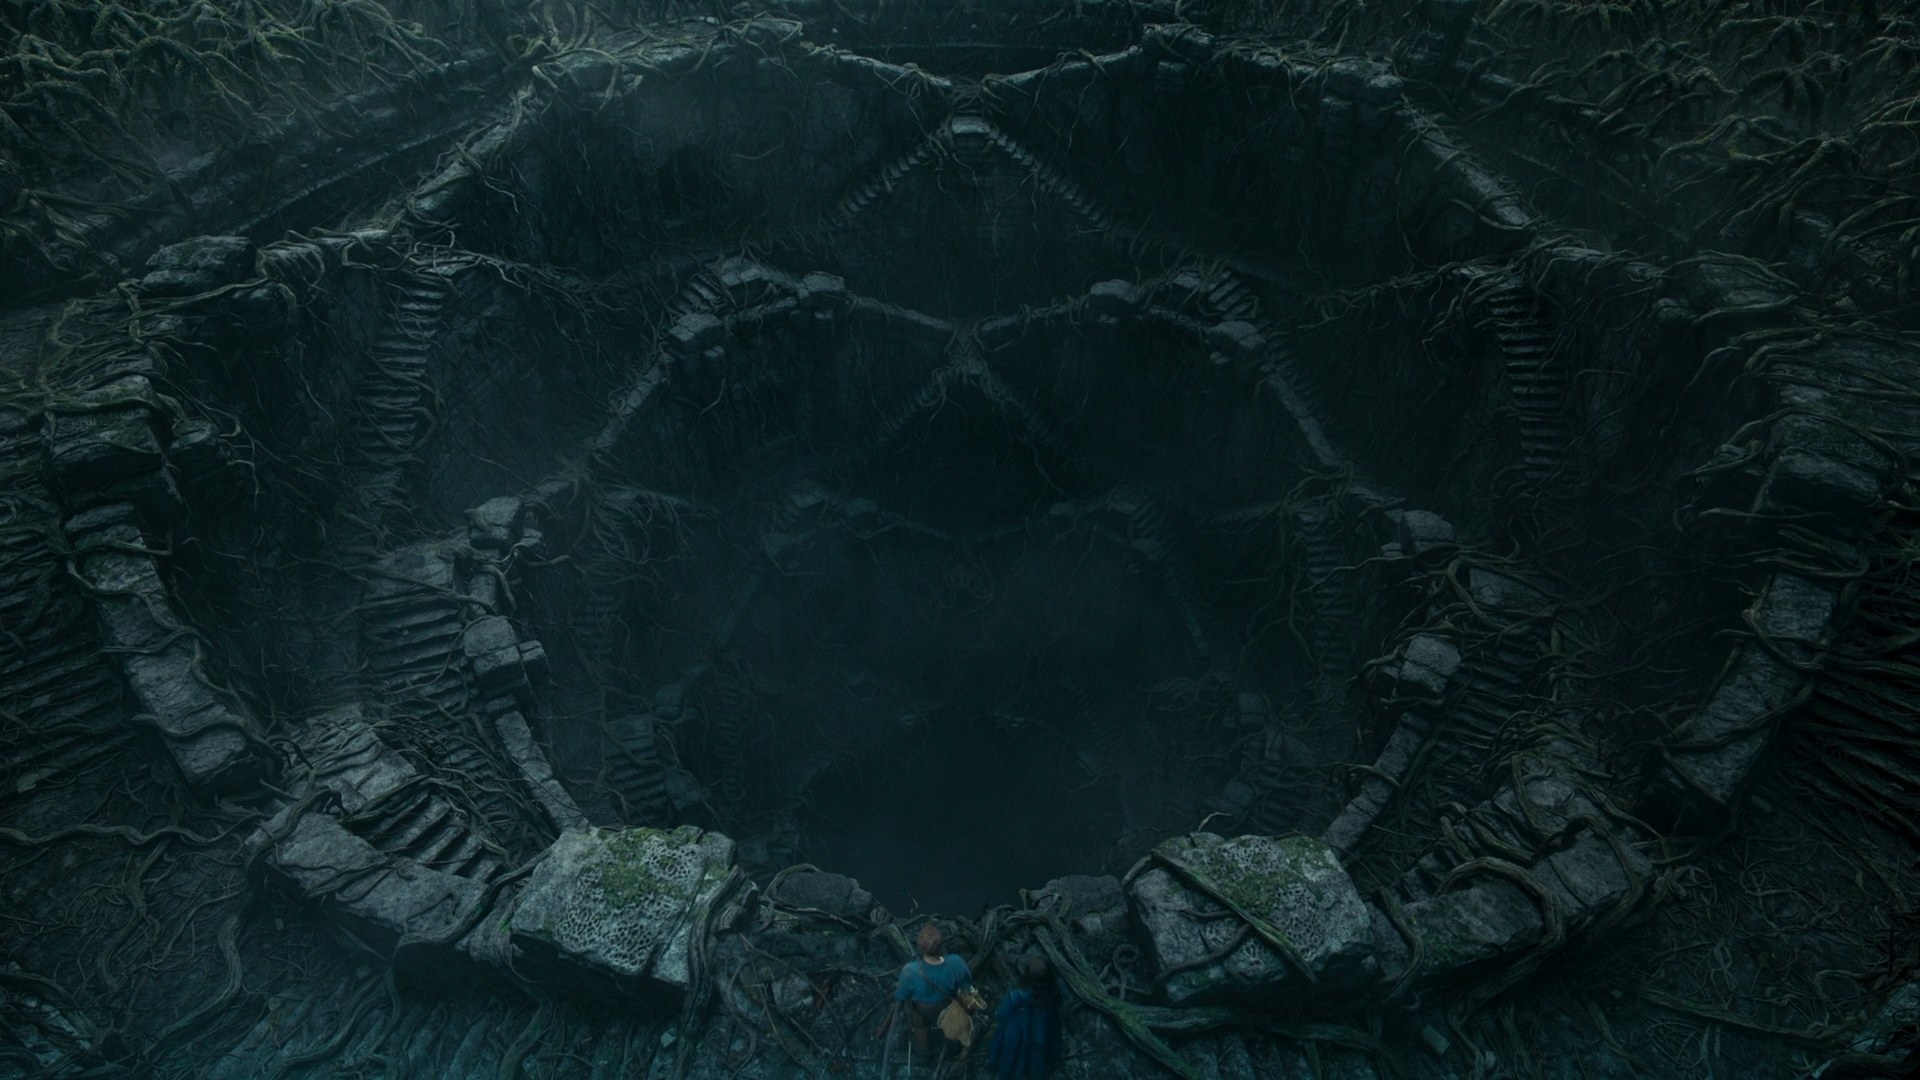 An overhead shot of Moiraine and Rand looking down into a large, open pit, the Eye of the World. The walls of the Eye are lined with triangular staircases leading down into a murky bottom